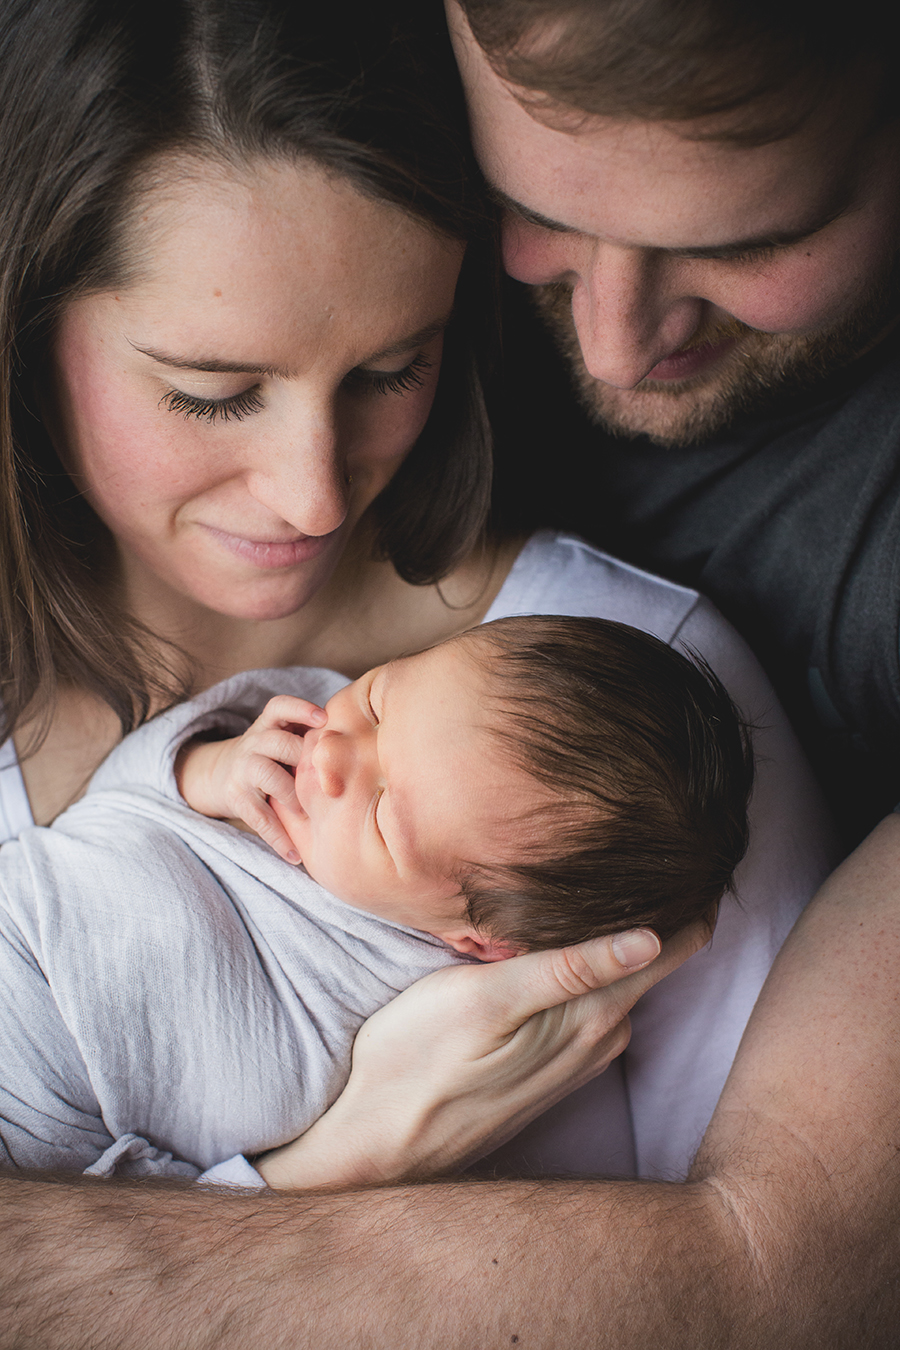 Mom and dad holding baby boy by Knoxville Wedding Photographer, Amanda May Photos.